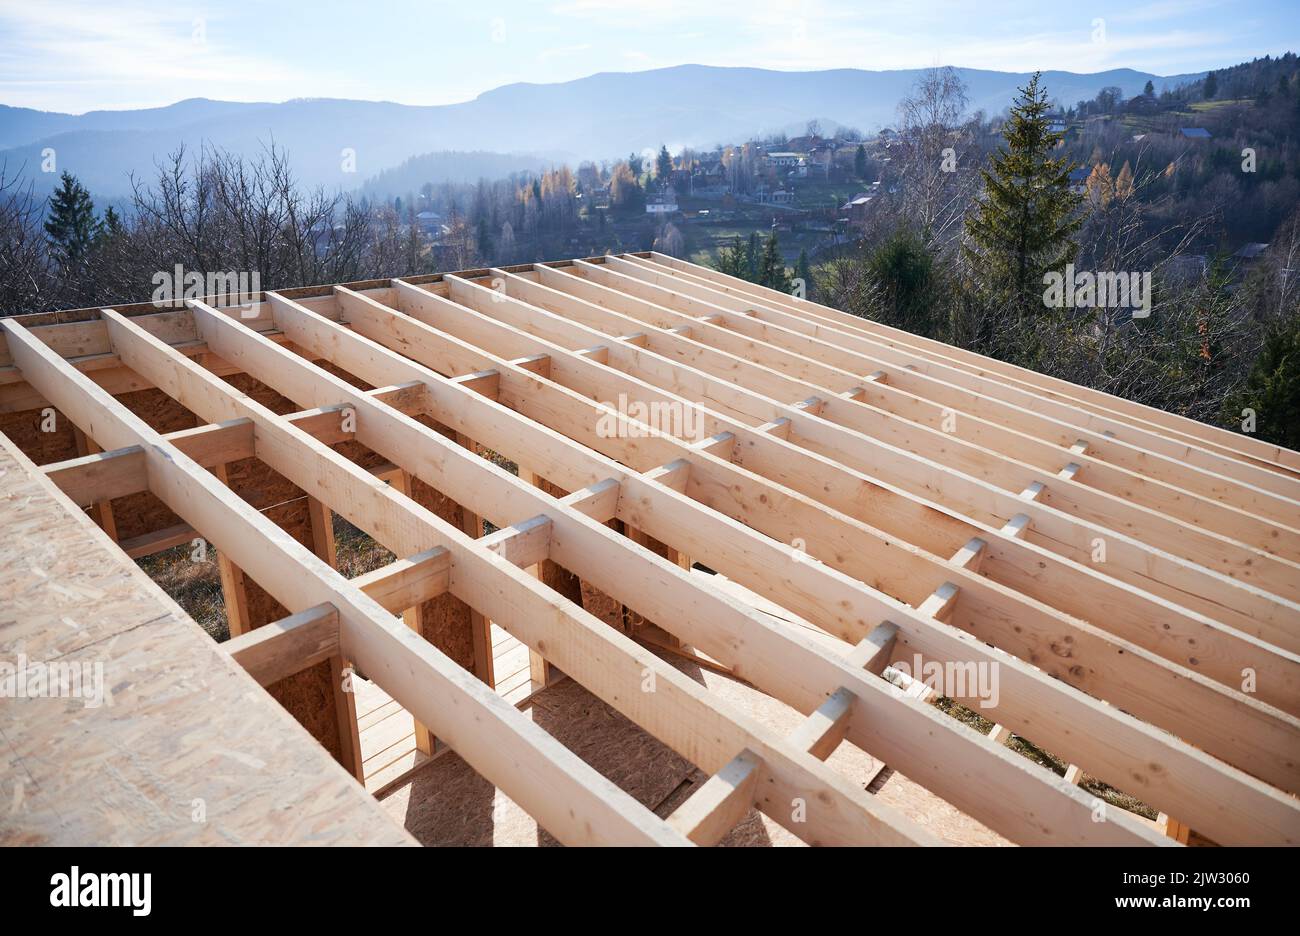 Aerial view roof of wooden frame house under construction in the mountains. Stock Photo